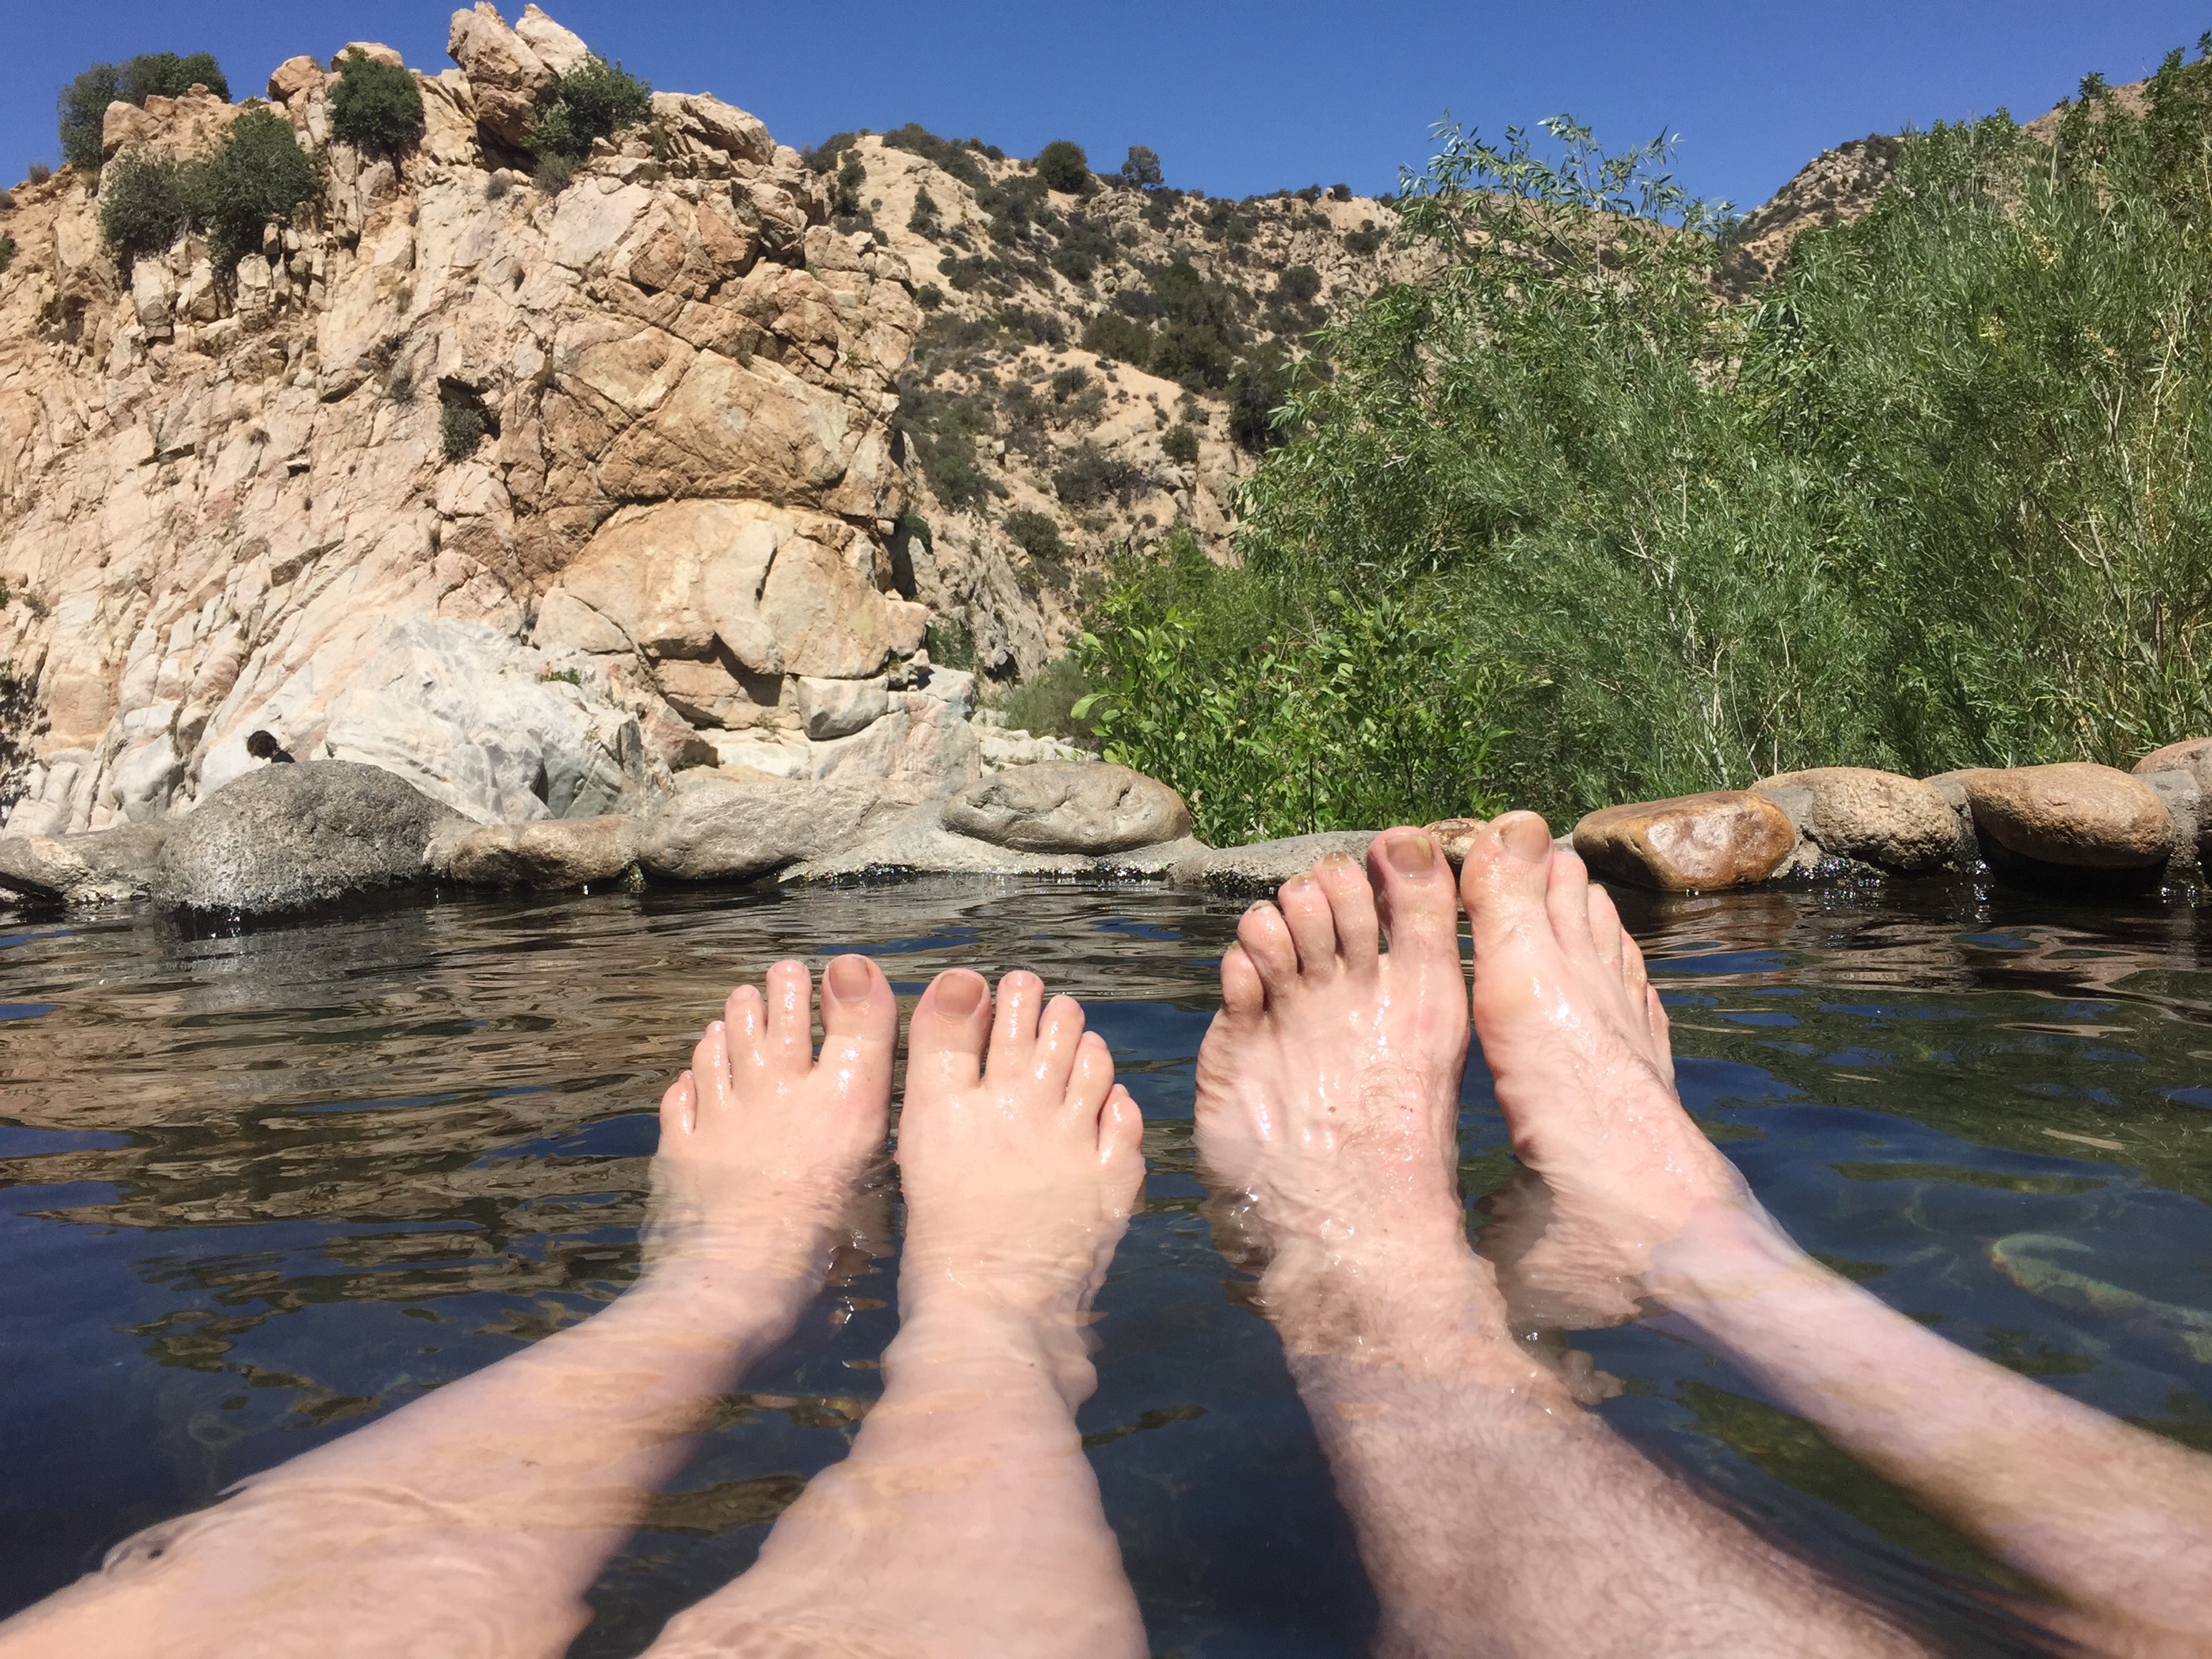 Day 25: Hot Springs!